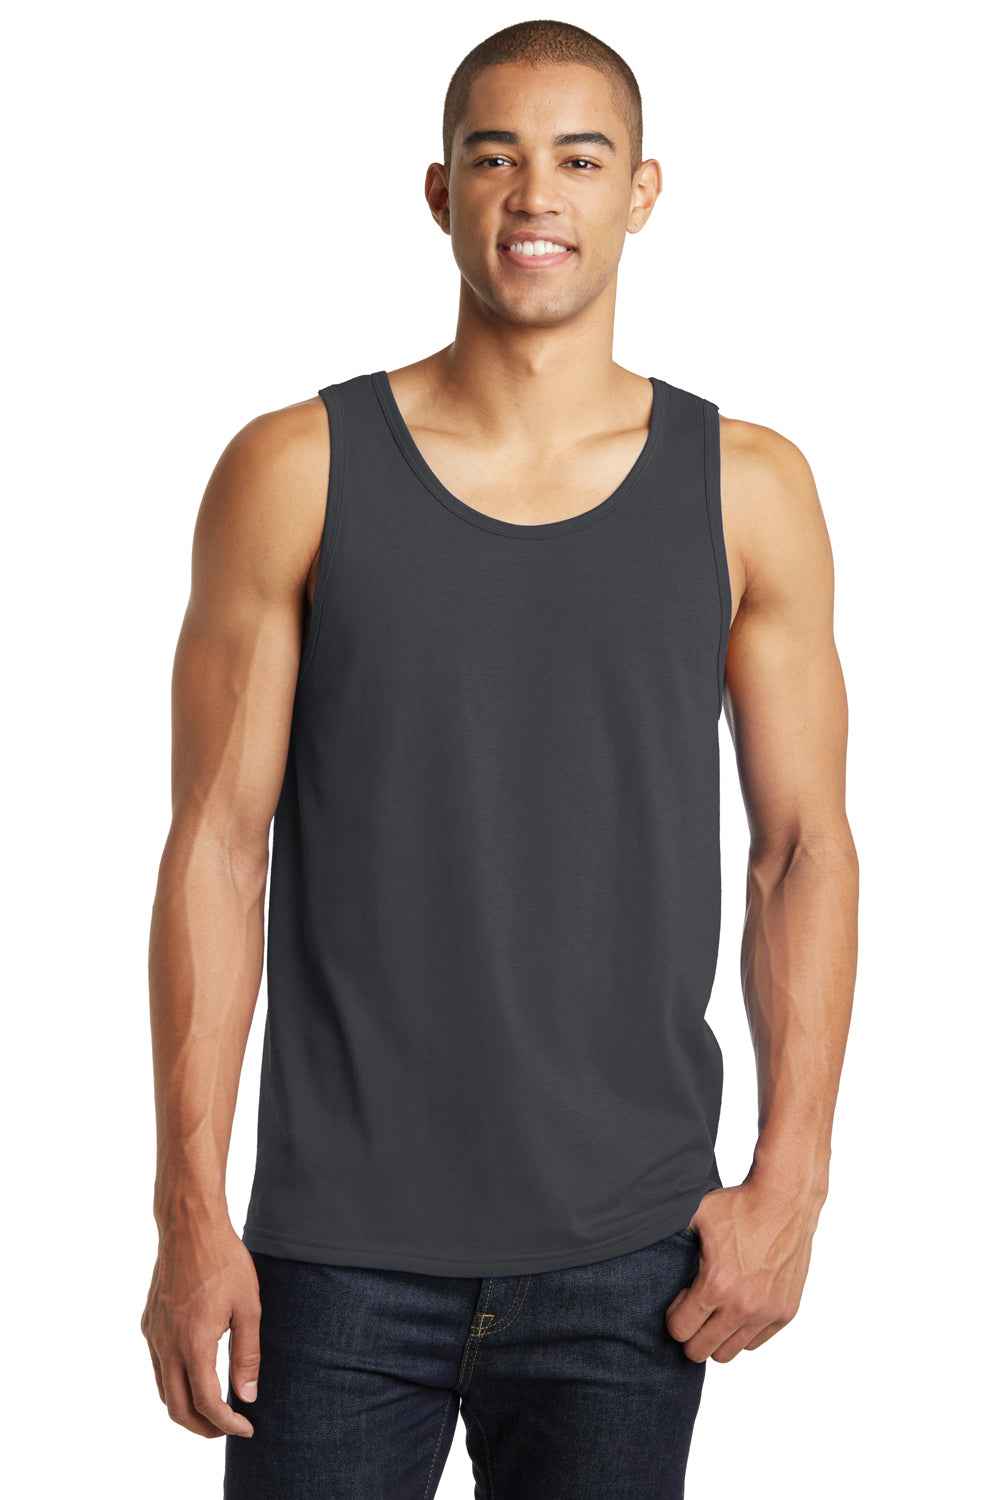 District DT5300 Mens The Concert Tank Top Charcoal Grey Front